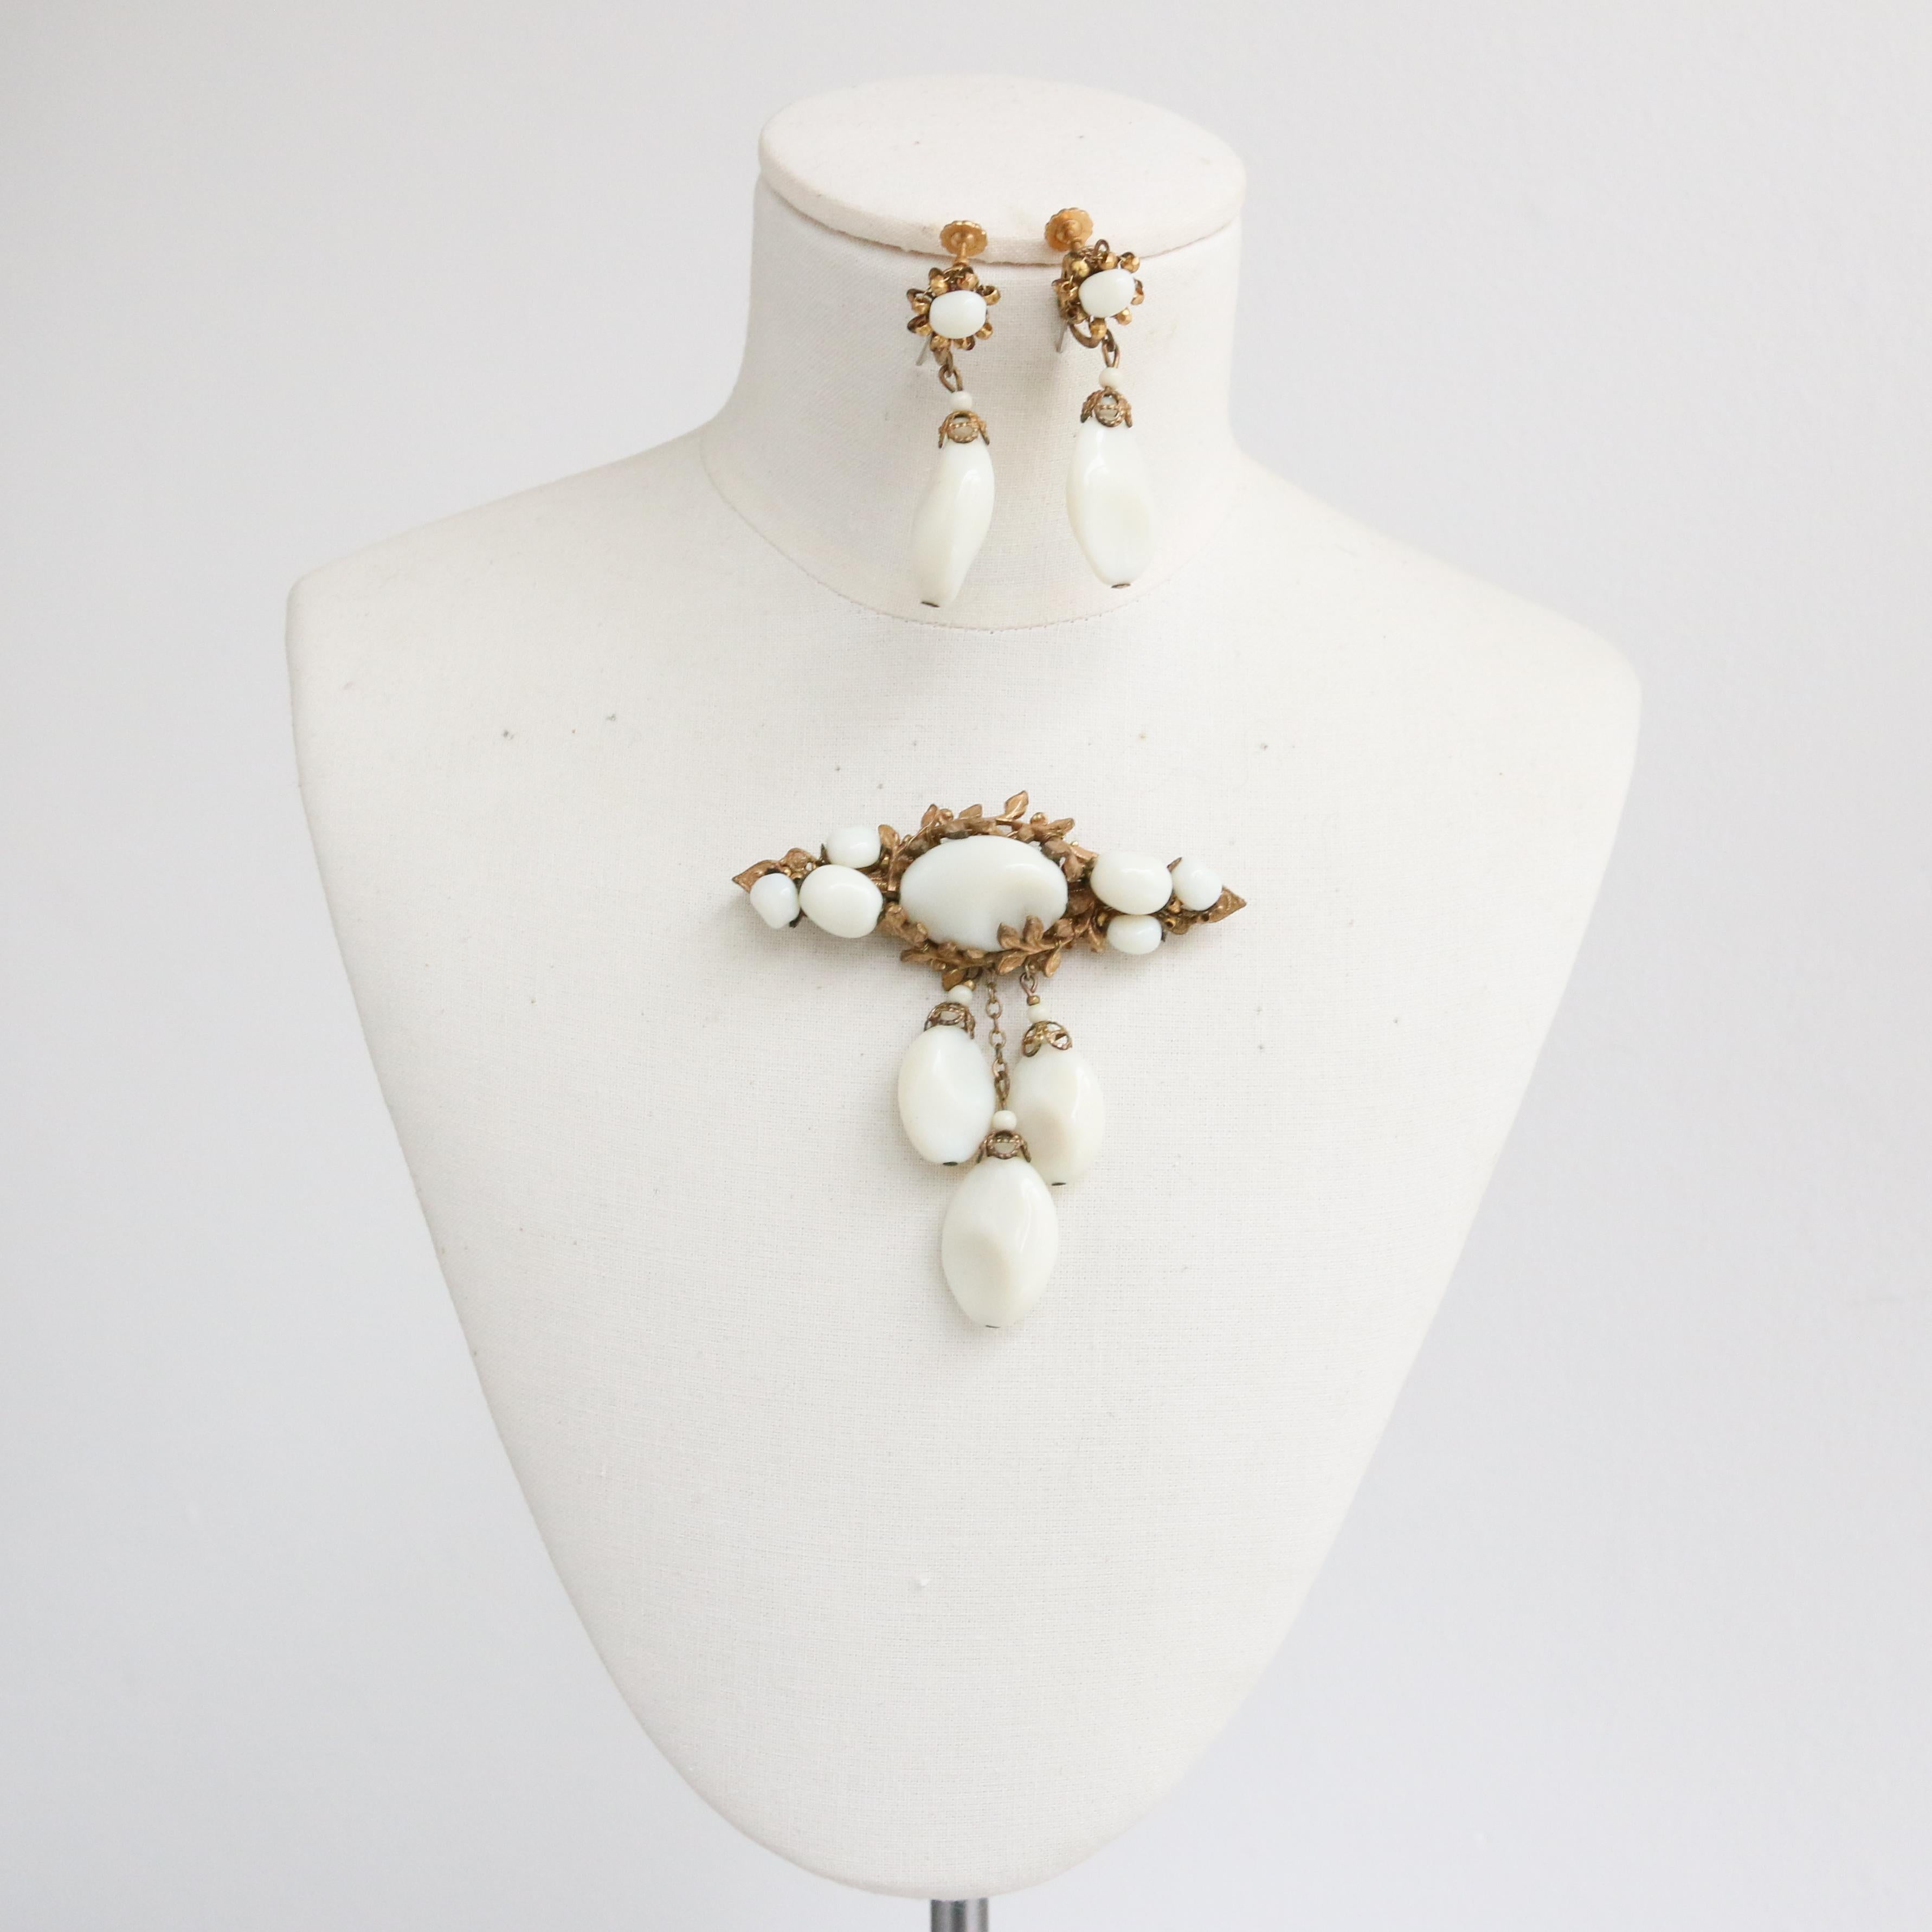 This incredible 1950's Miriam Haskell brooch and earring demi-parure set, made up of statement hand worked milk glass and a leaf filigree design are rare pieces to behold.

The pendent brooch showcases an ornate gold filigree design decorated with